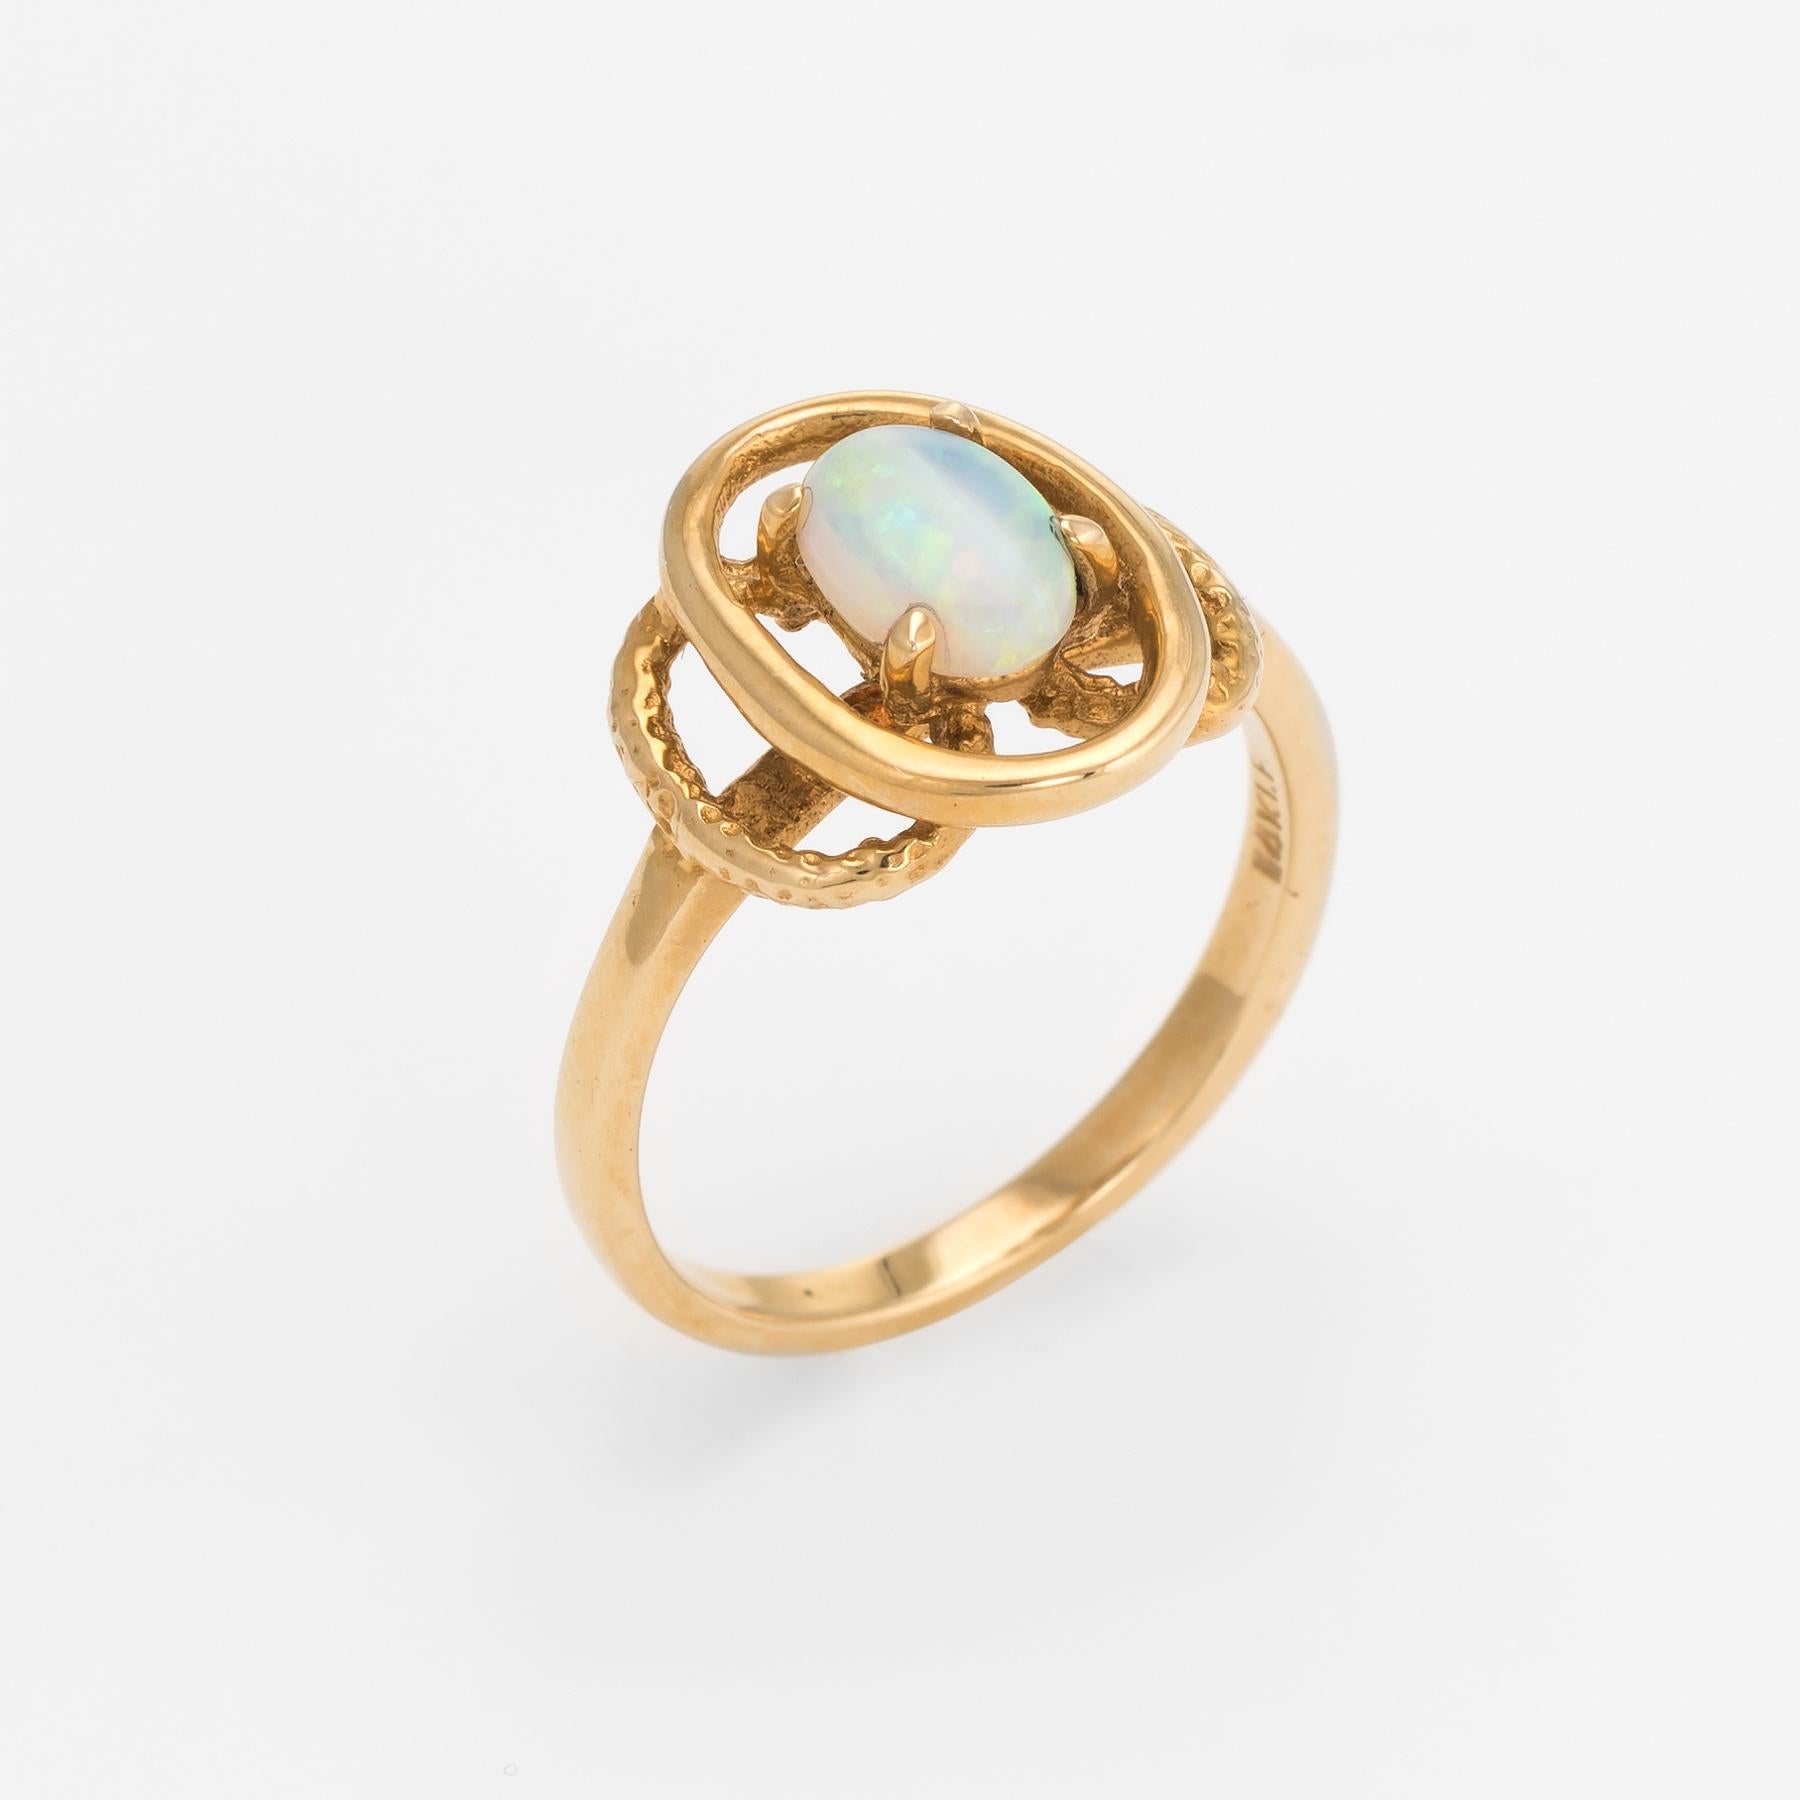 Finely detailed vintage opal cocktail ring (circa 1960s to 1970s), crafted in 14 karat yellow gold. 

Centrally mounted natural opal measures 7mm x 5mm (estimated at 0.75 carats). The opal is in excellent condition and free of cracks or chips. 

The